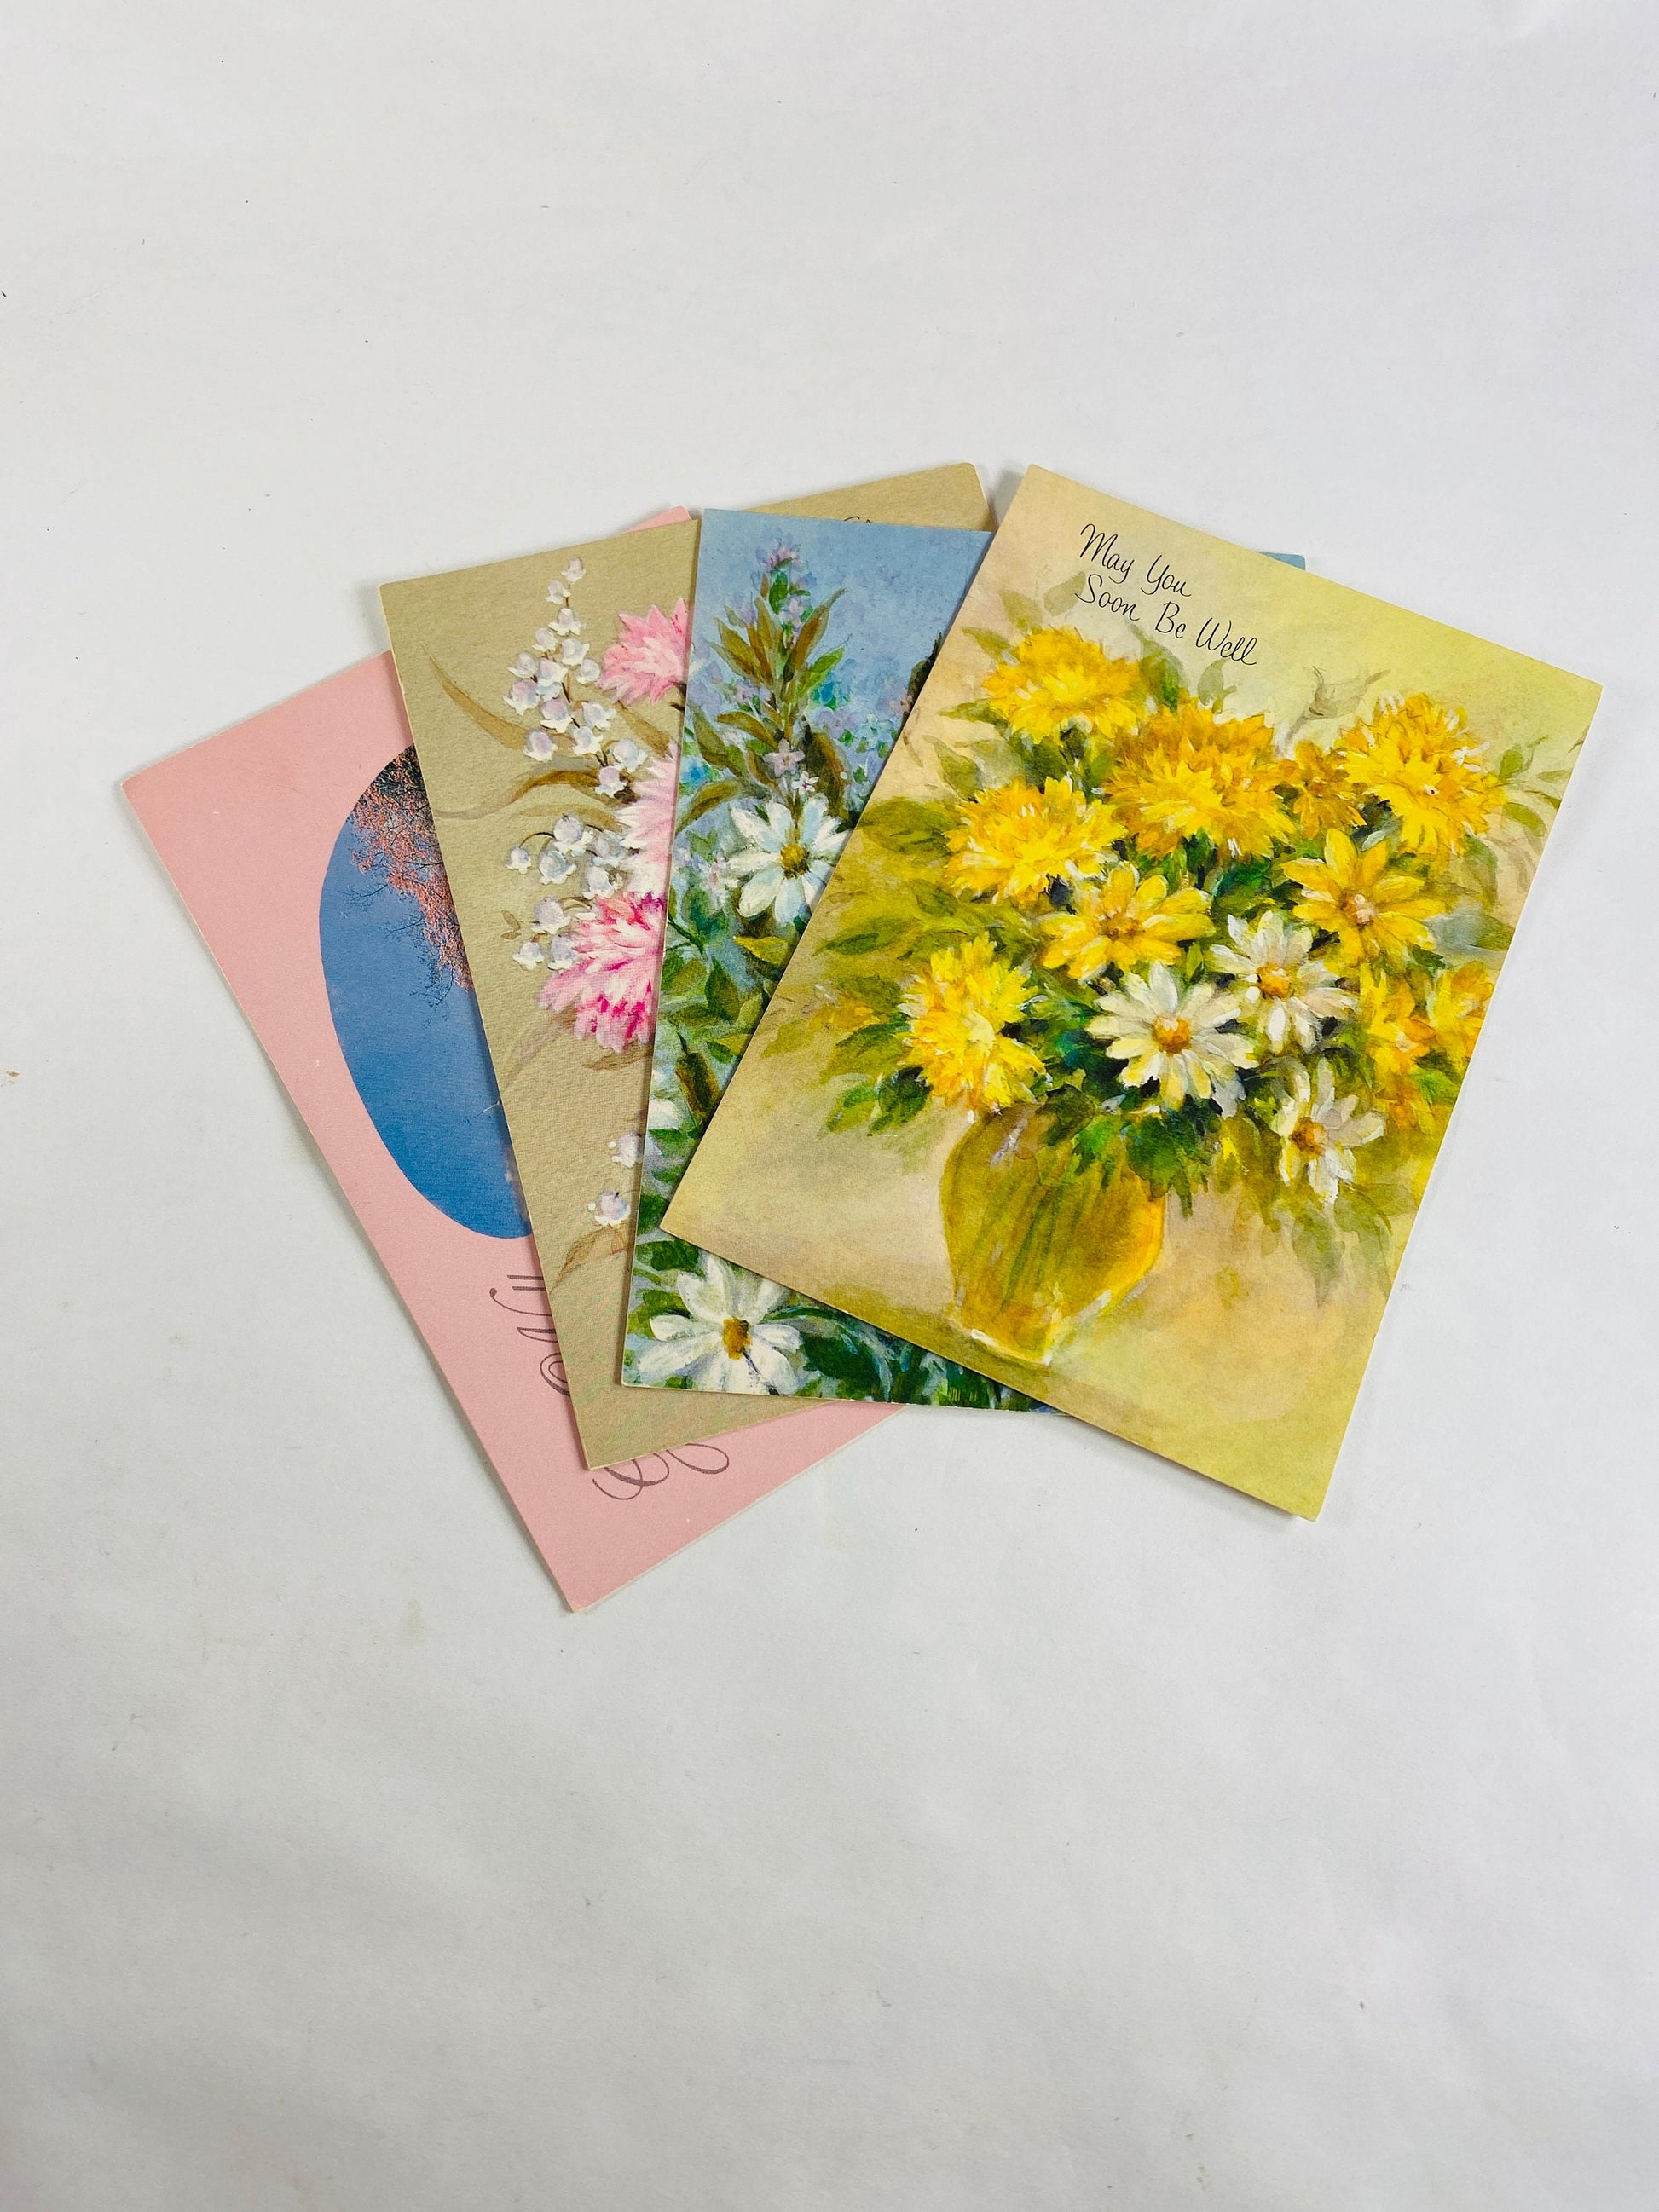 Vintage 1960s best wishes get well cards Lot of 4 UNUSED greetings in good condition! Flowers roses nature decor Sunshine made in the USA